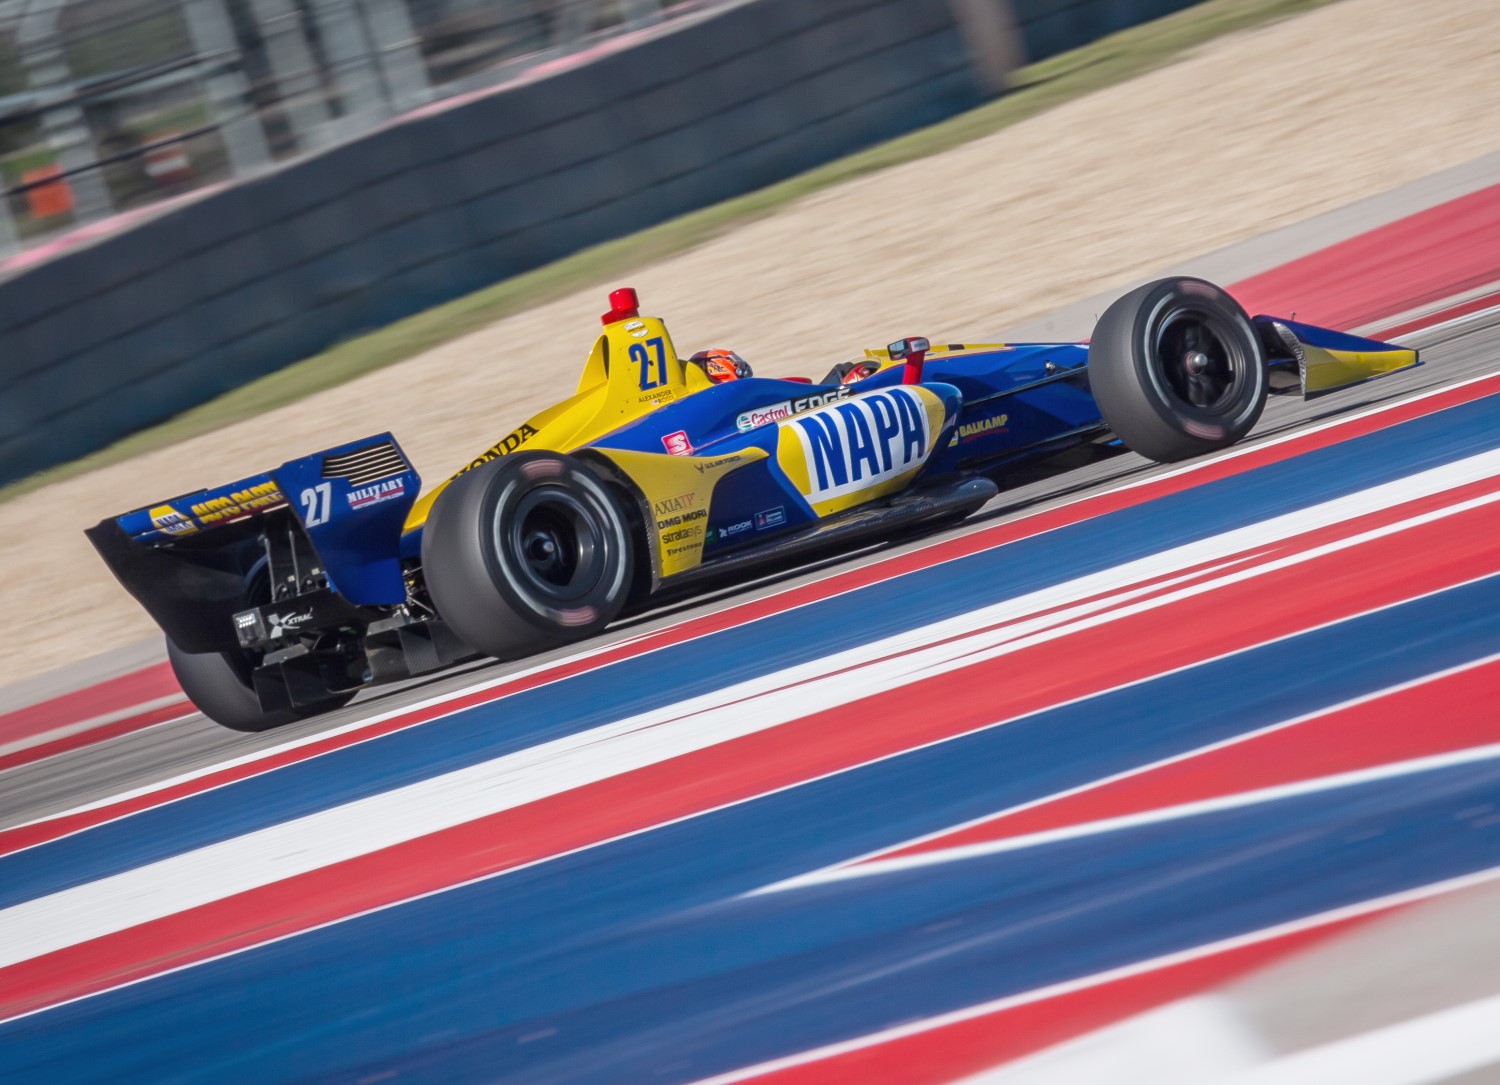 2nd quick overall, and quickest on Wednesday, Alexander Rossi